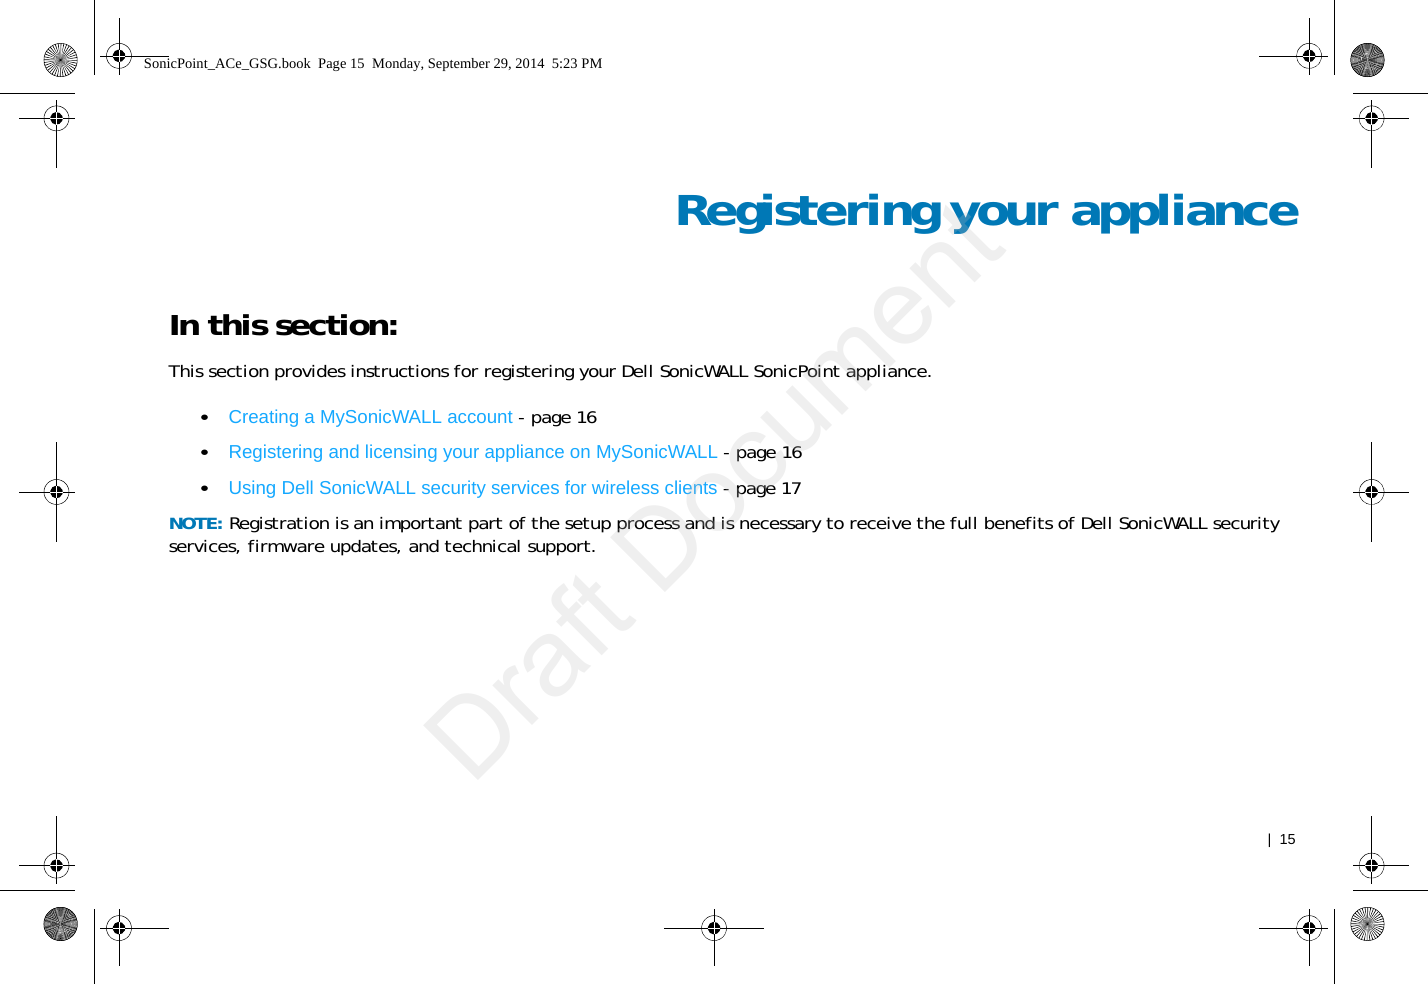   |  15Registering your applianceIn this section:This section provides instructions for registering your Dell SonicWALL SonicPoint appliance.•Creating a MySonicWALL account - page 16•Registering and licensing your appliance on MySonicWALL - page 16•Using Dell SonicWALL security services for wireless clients - page 17NOTE: Registration is an important part of the setup process and is necessary to receive the full benefits of Dell SonicWALL security services, firmware updates, and technical support.SonicPoint_ACe_GSG.book  Page 15  Monday, September 29, 2014  5:23 PMDraft Document